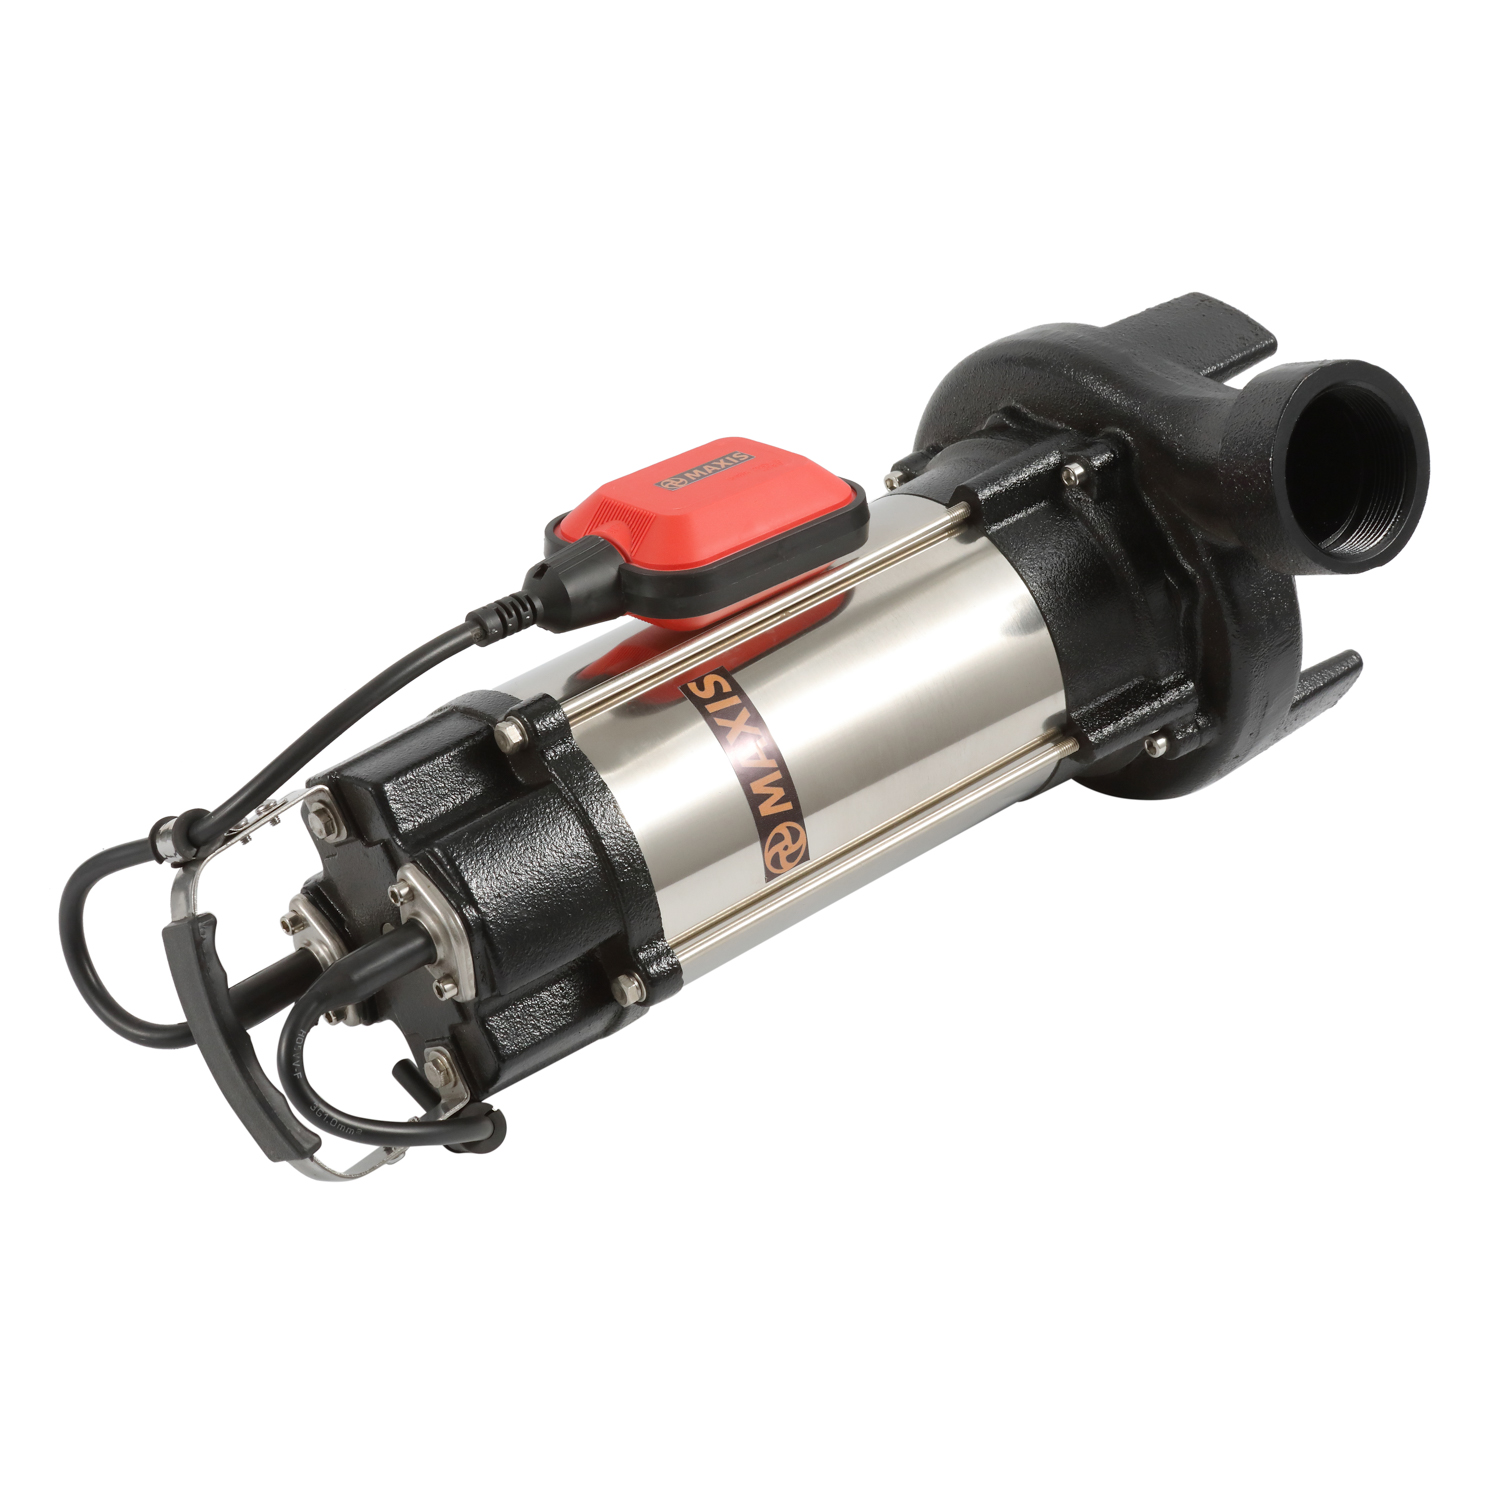 Electric Heavy Duty Submersible Water Pumps V370C